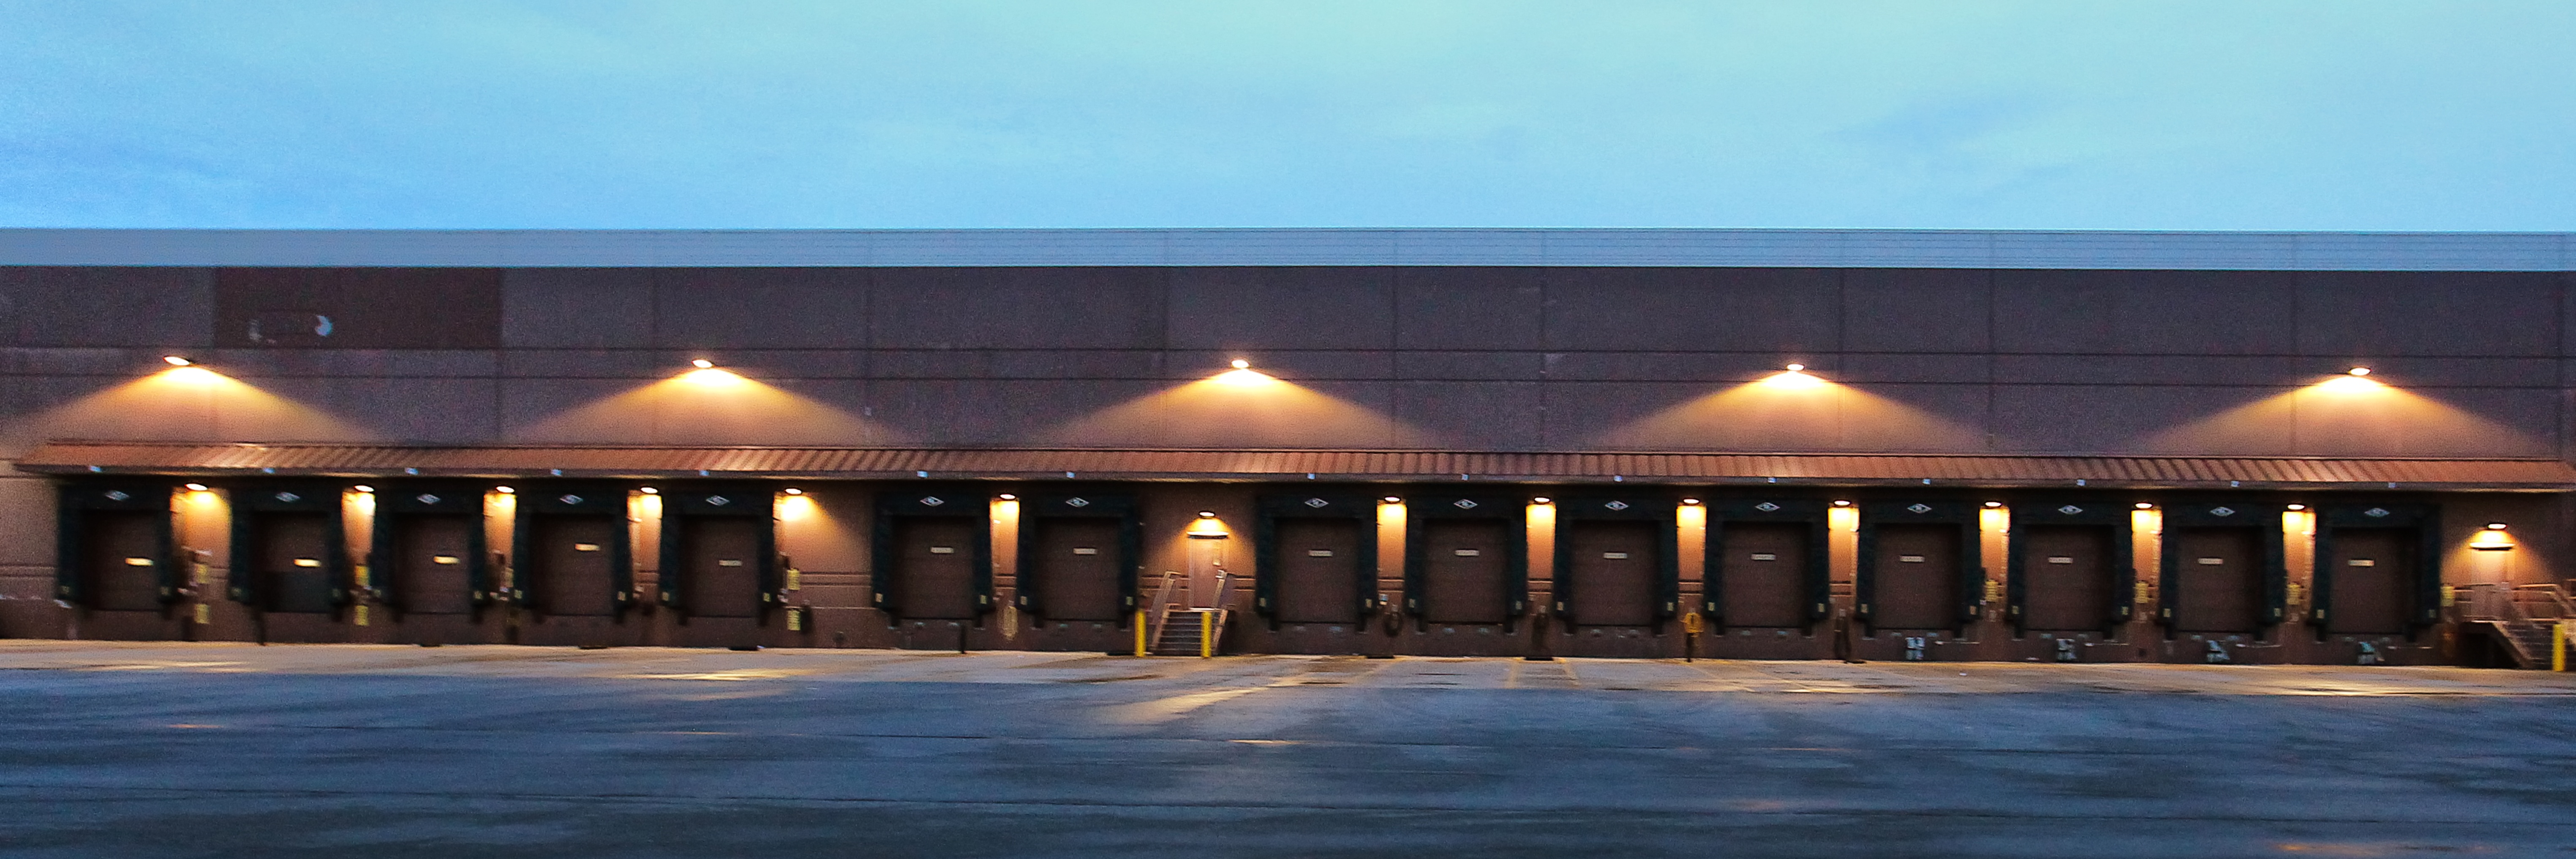 LED Wall Packs Increase Visibility and Security While Reducing Energy Consumption at Fabiano Brothers